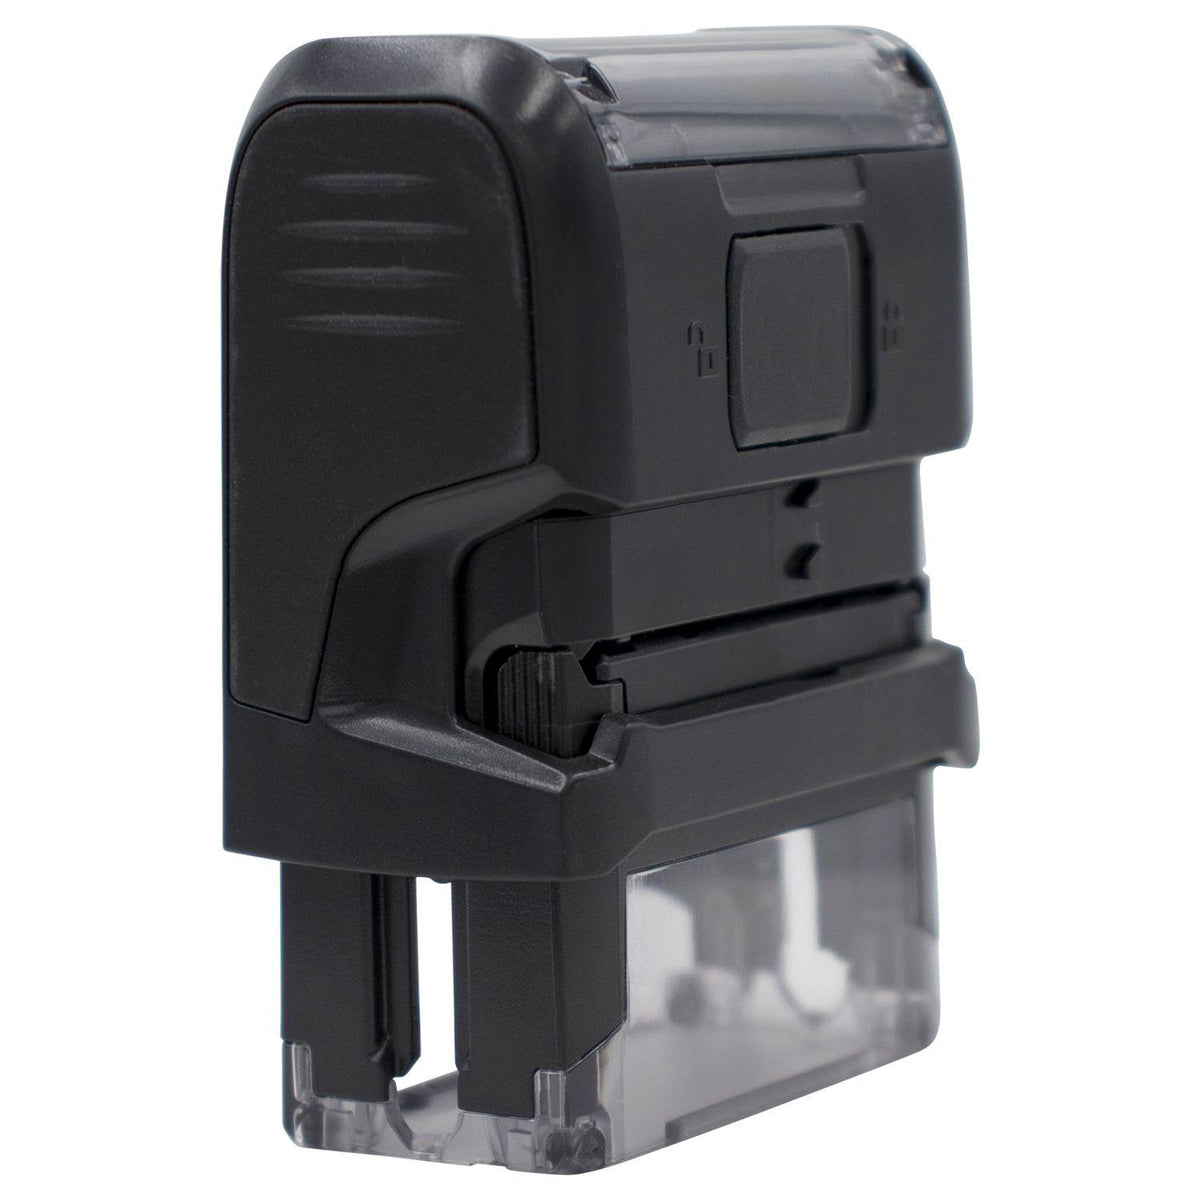 Self Inking Cash Only Stamp - Engineer Seal Stamps - Brand_Trodat, Impression Size_Small, Stamp Type_Self-Inking Stamp, Type of Use_Business, Type of Use_Finance